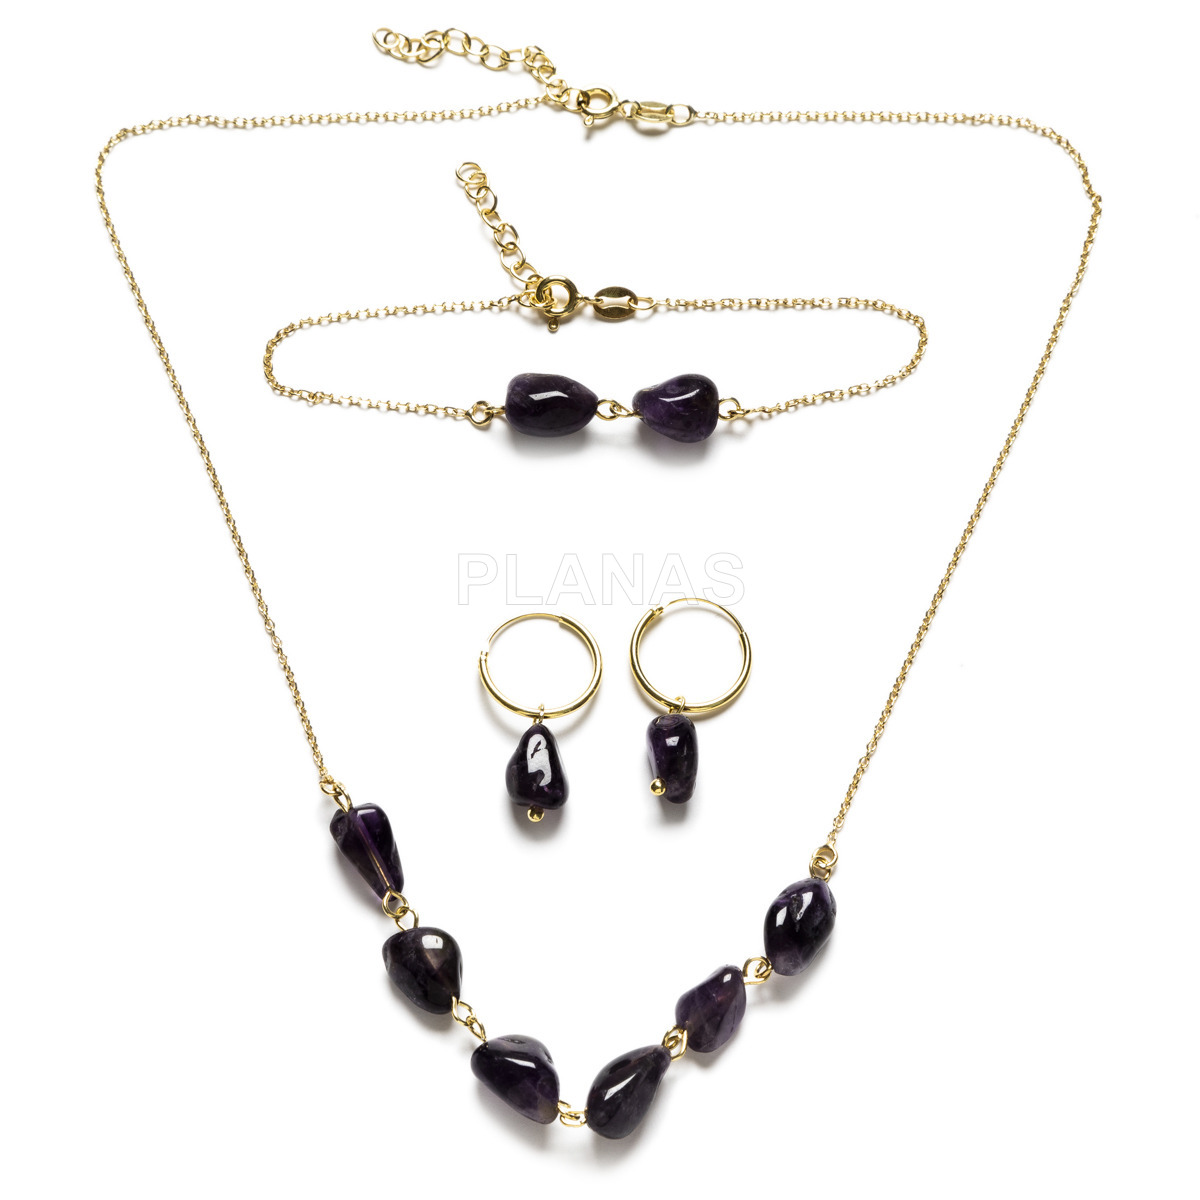 Set of necklace, bracelet and earrings in sterling silver and gold plated with amethyst.